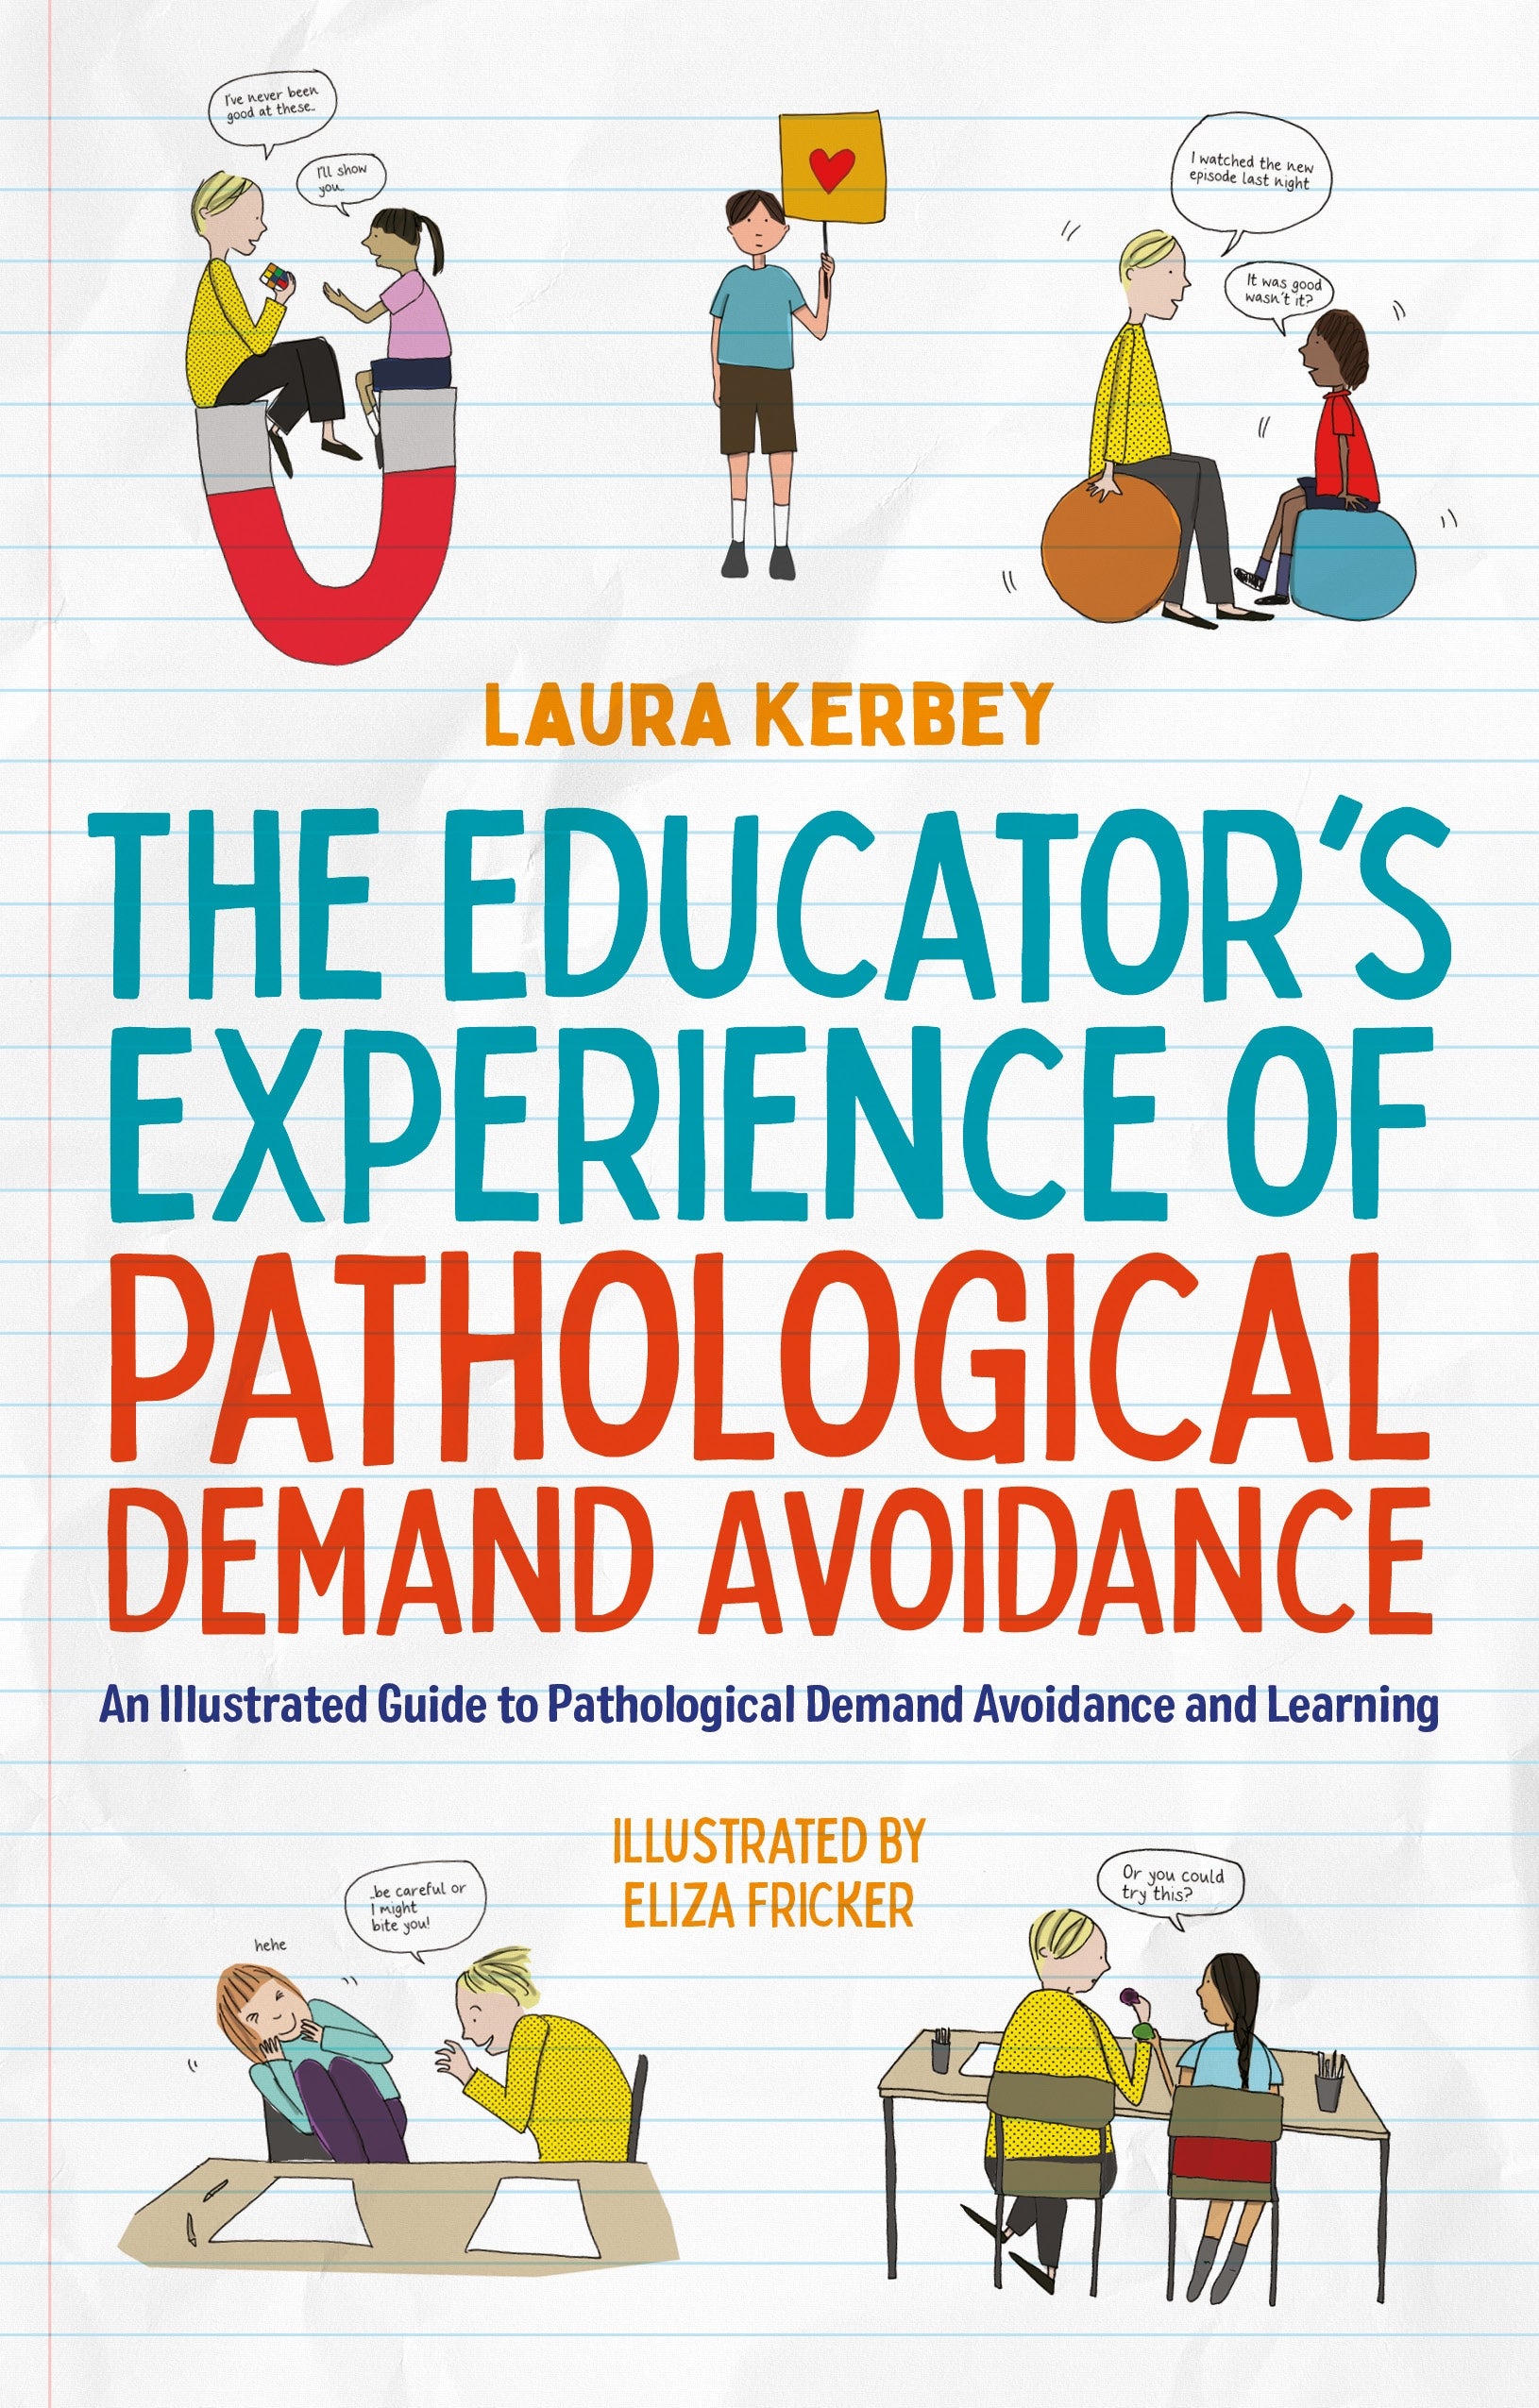 The Educator’s Experience of Pathological Demand Avoidance by Eliza Fricker, Laura Kerbey